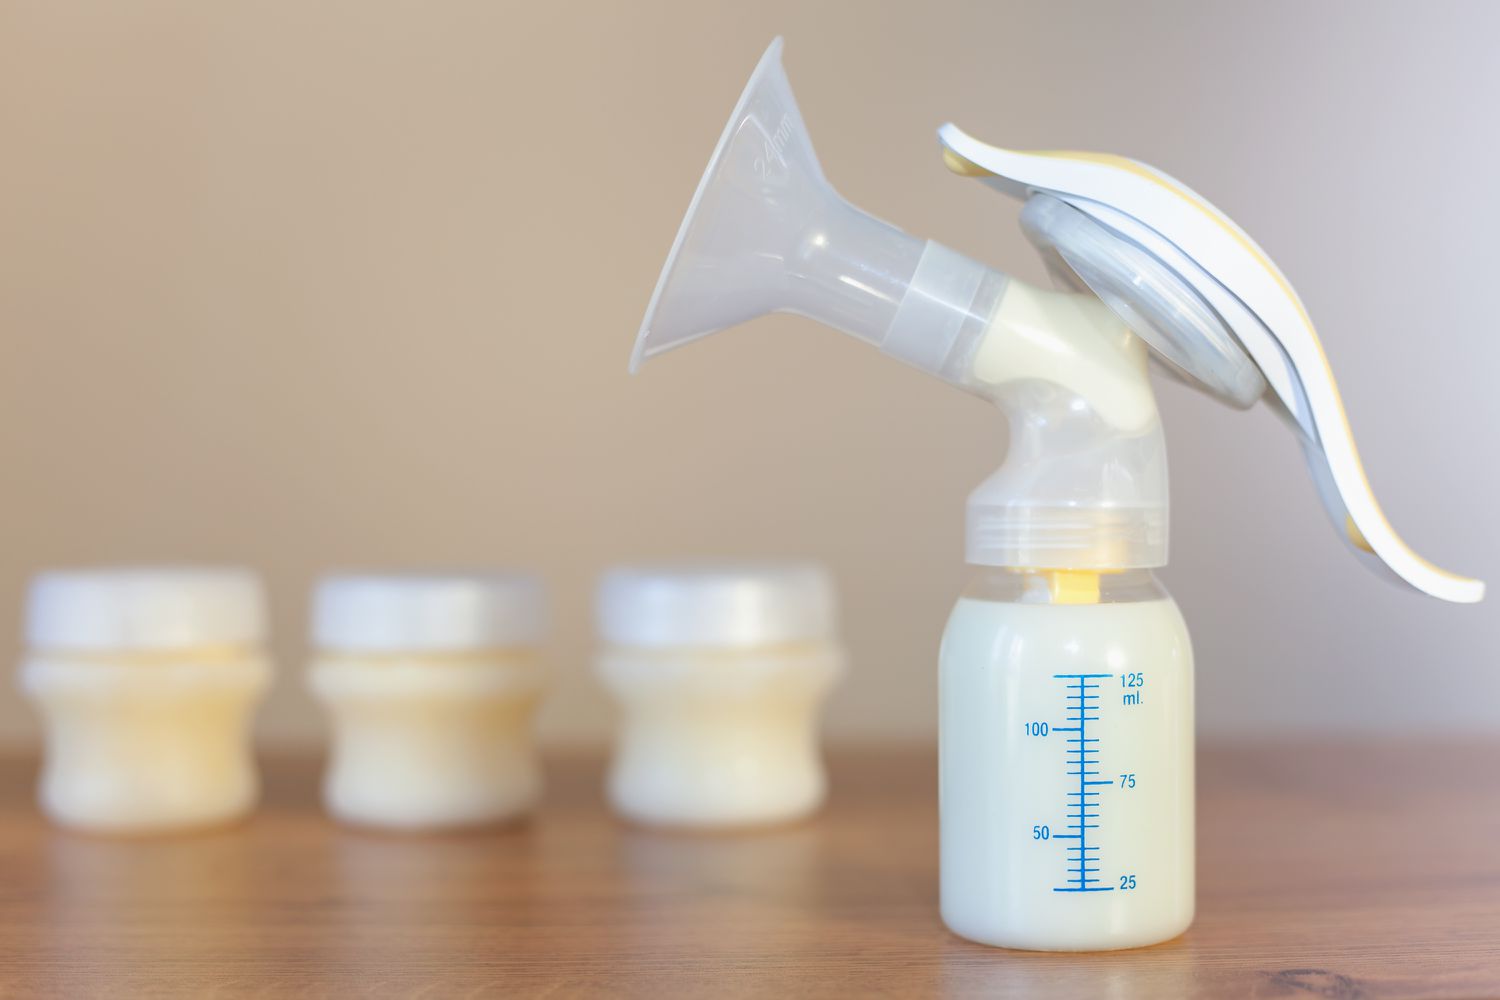 Breast Pumps Market by Product (Open System Breast Pump, Closed System Breast Pump), by Technology (Powered Breast Pump, Manual Breast Pump, and Electric Breast Pump), by Application (Personal Use and Hospital Grade) – Global Outlook & Forecast 2022-2030